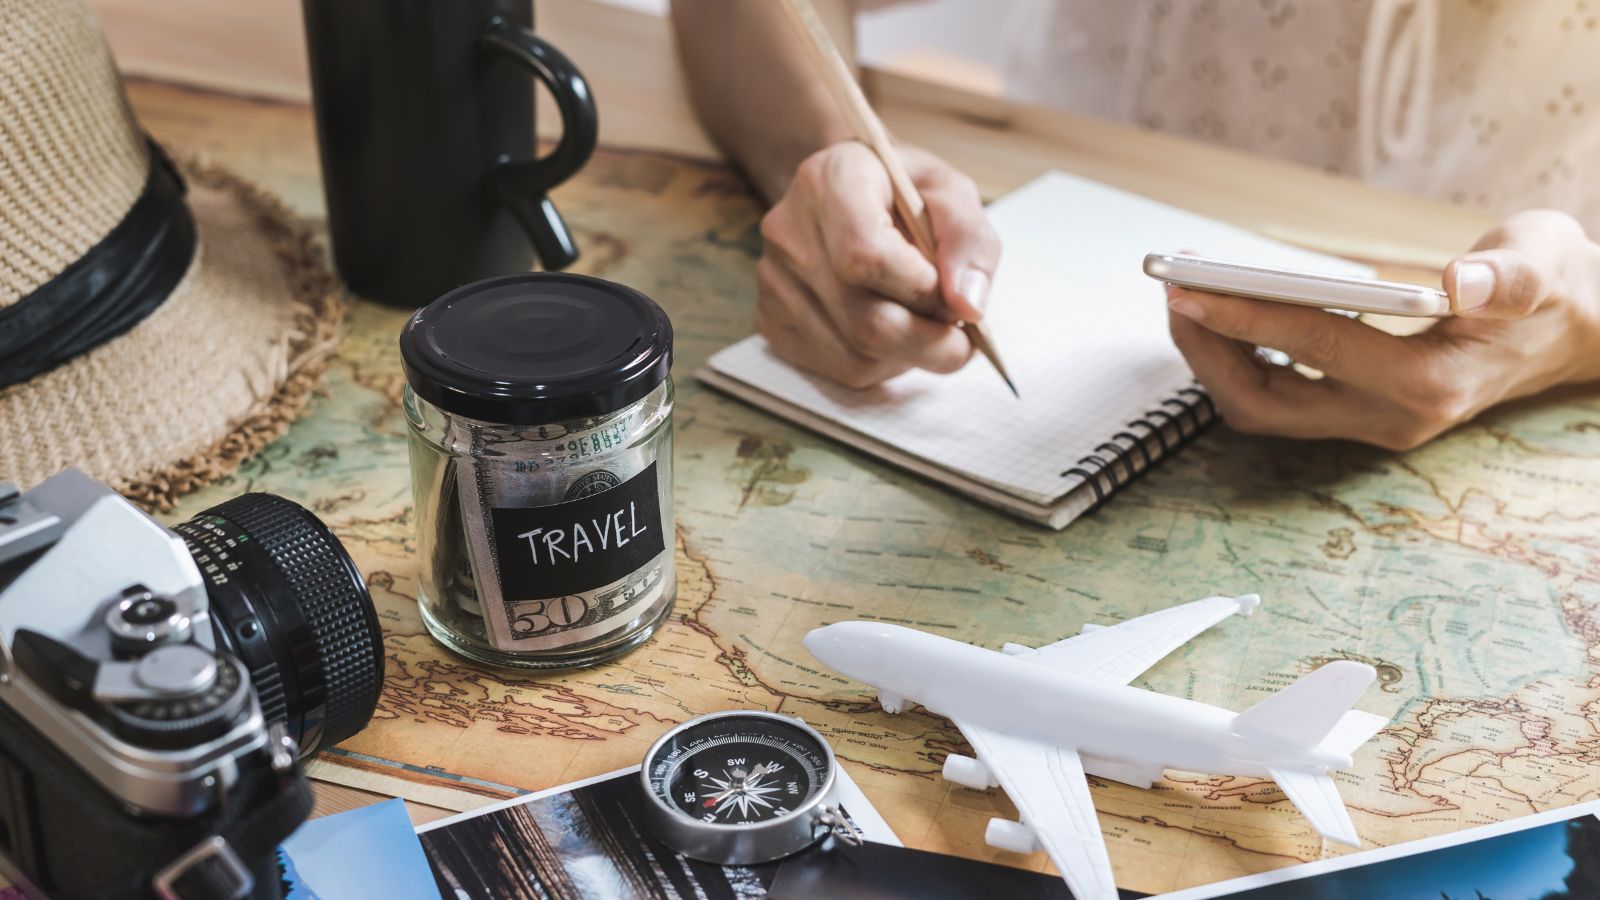 <p>Ignoring your travel budget is a recipe for financial stress. Keeping track of expenses ensures you avoid the shock of unexpected bills later on. It’s crucial to be aware of your spending, even if you have funds to spare. Make sure you add plenty of flexibility so that you have enough spare funds to cover the unexpected.</p>